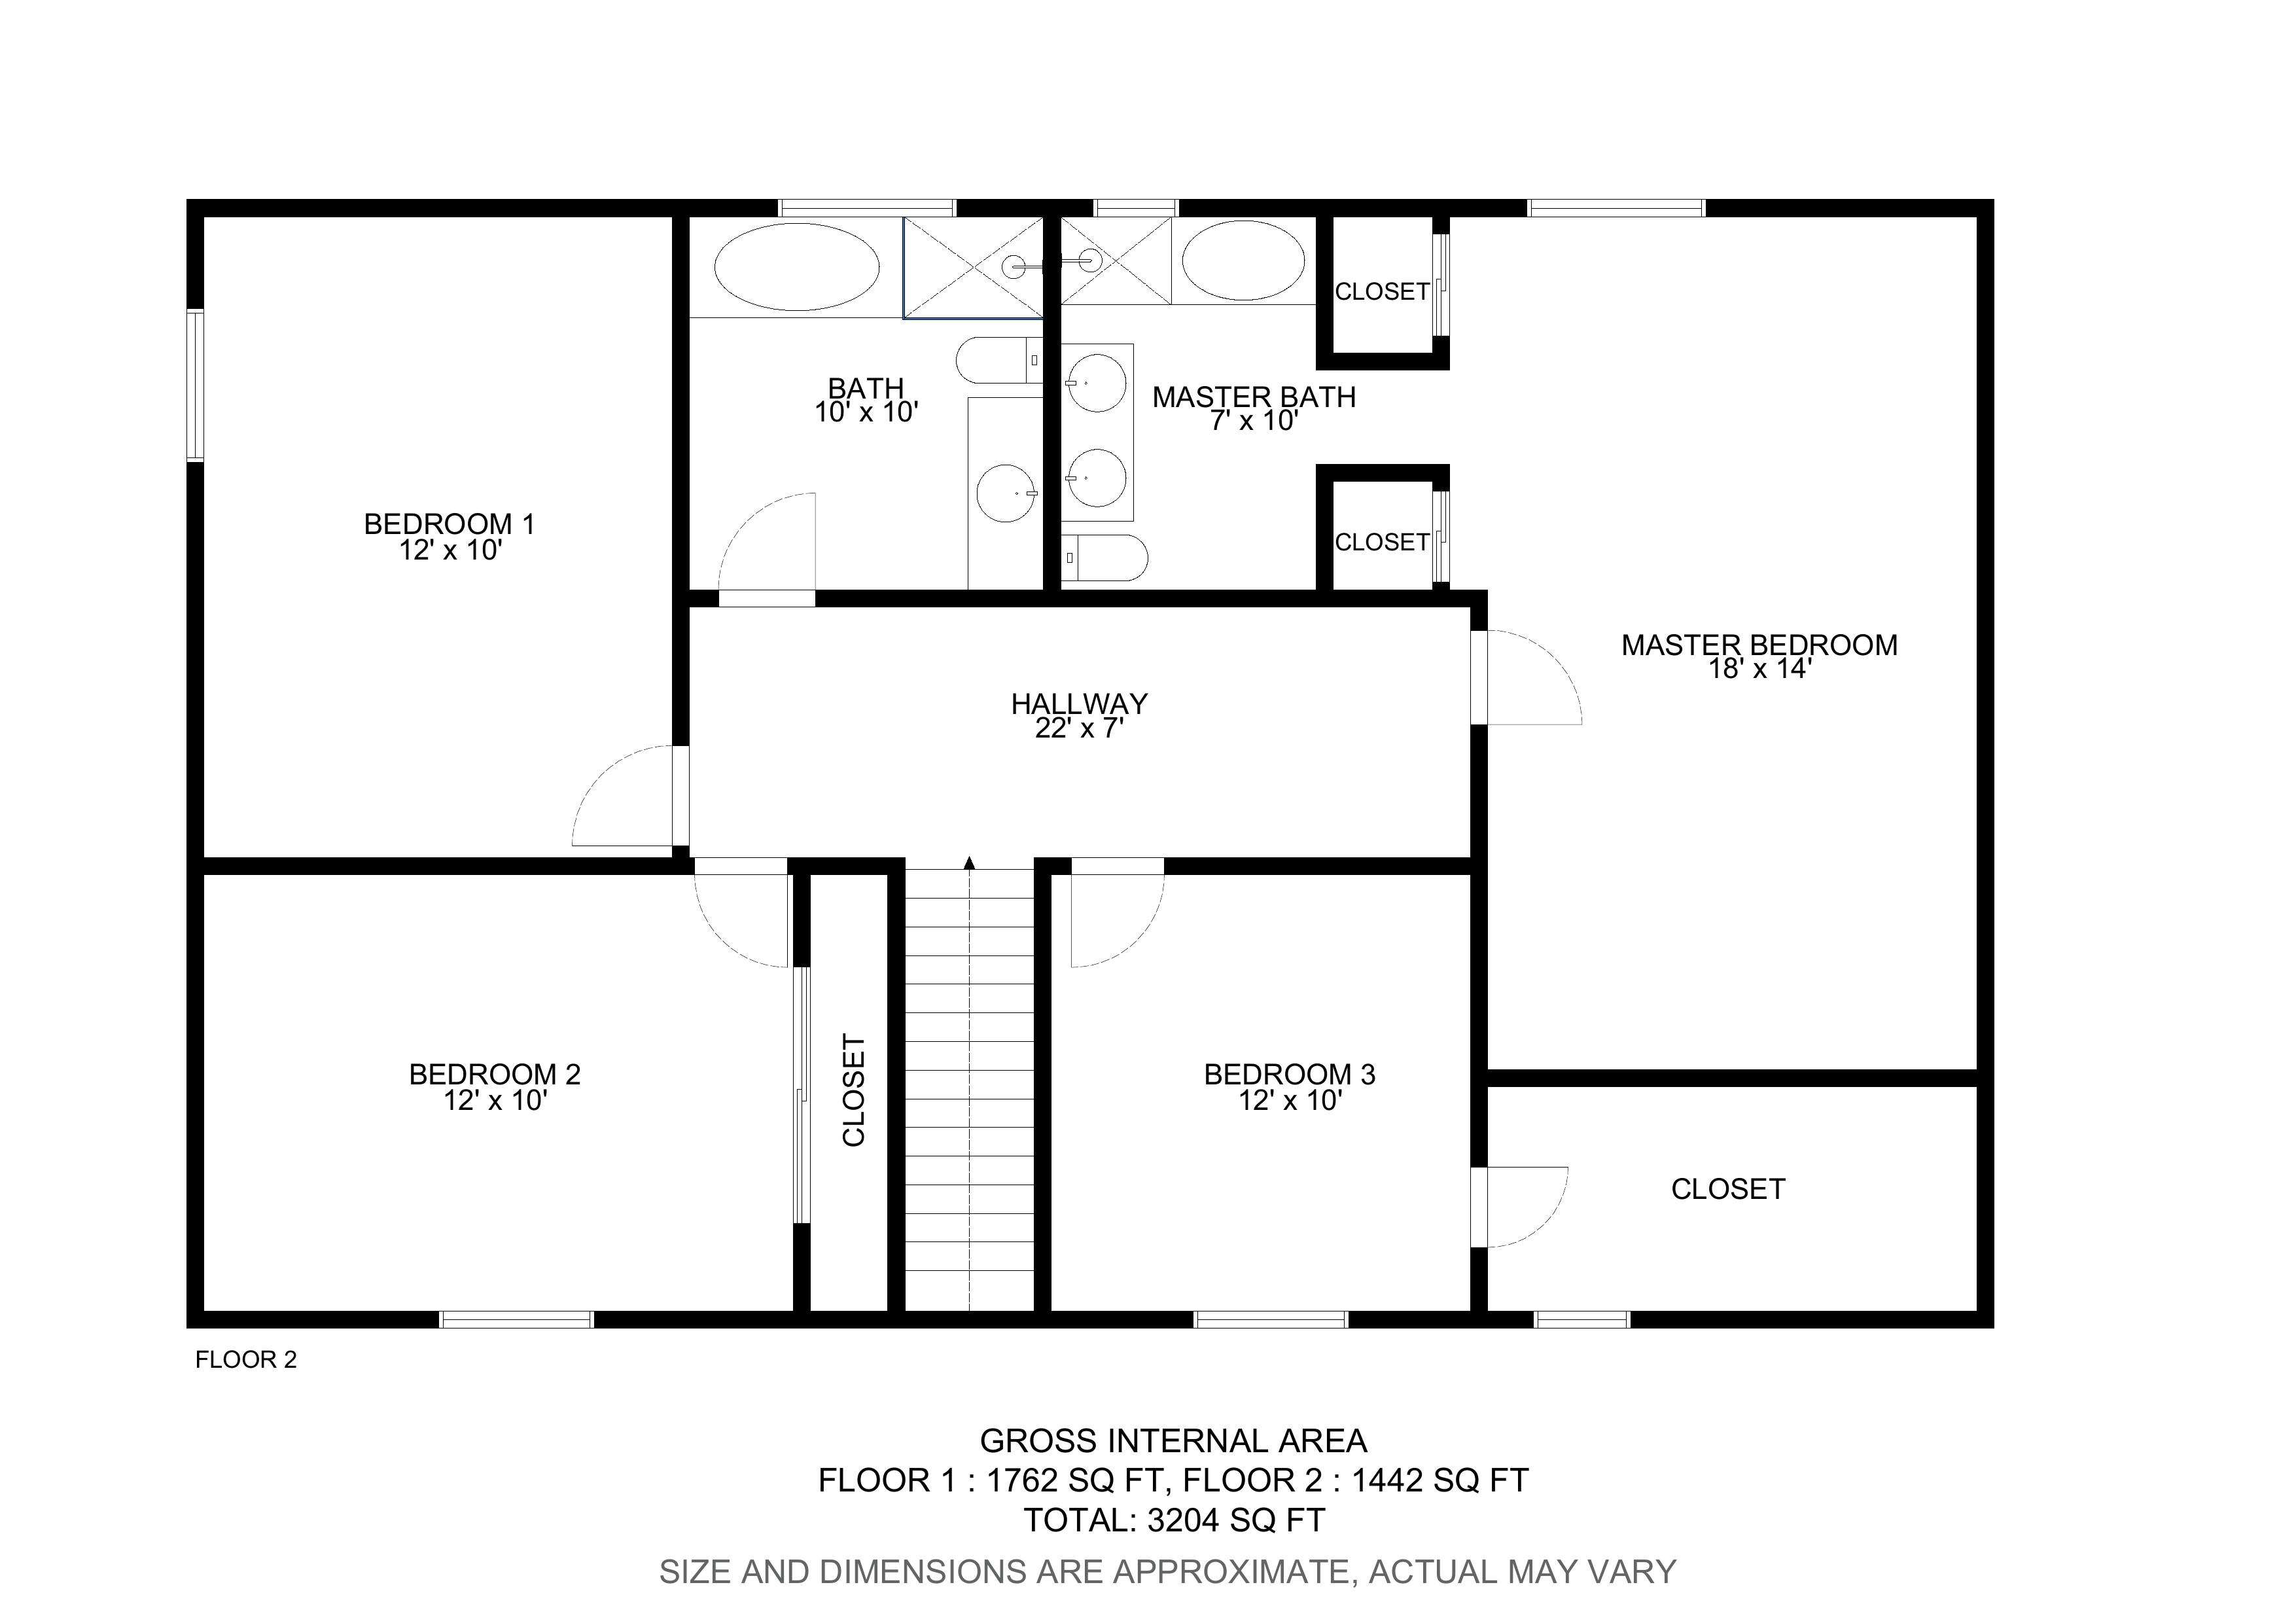 Draw Floor Plans With the RoomSketcher App - RoomSketcher